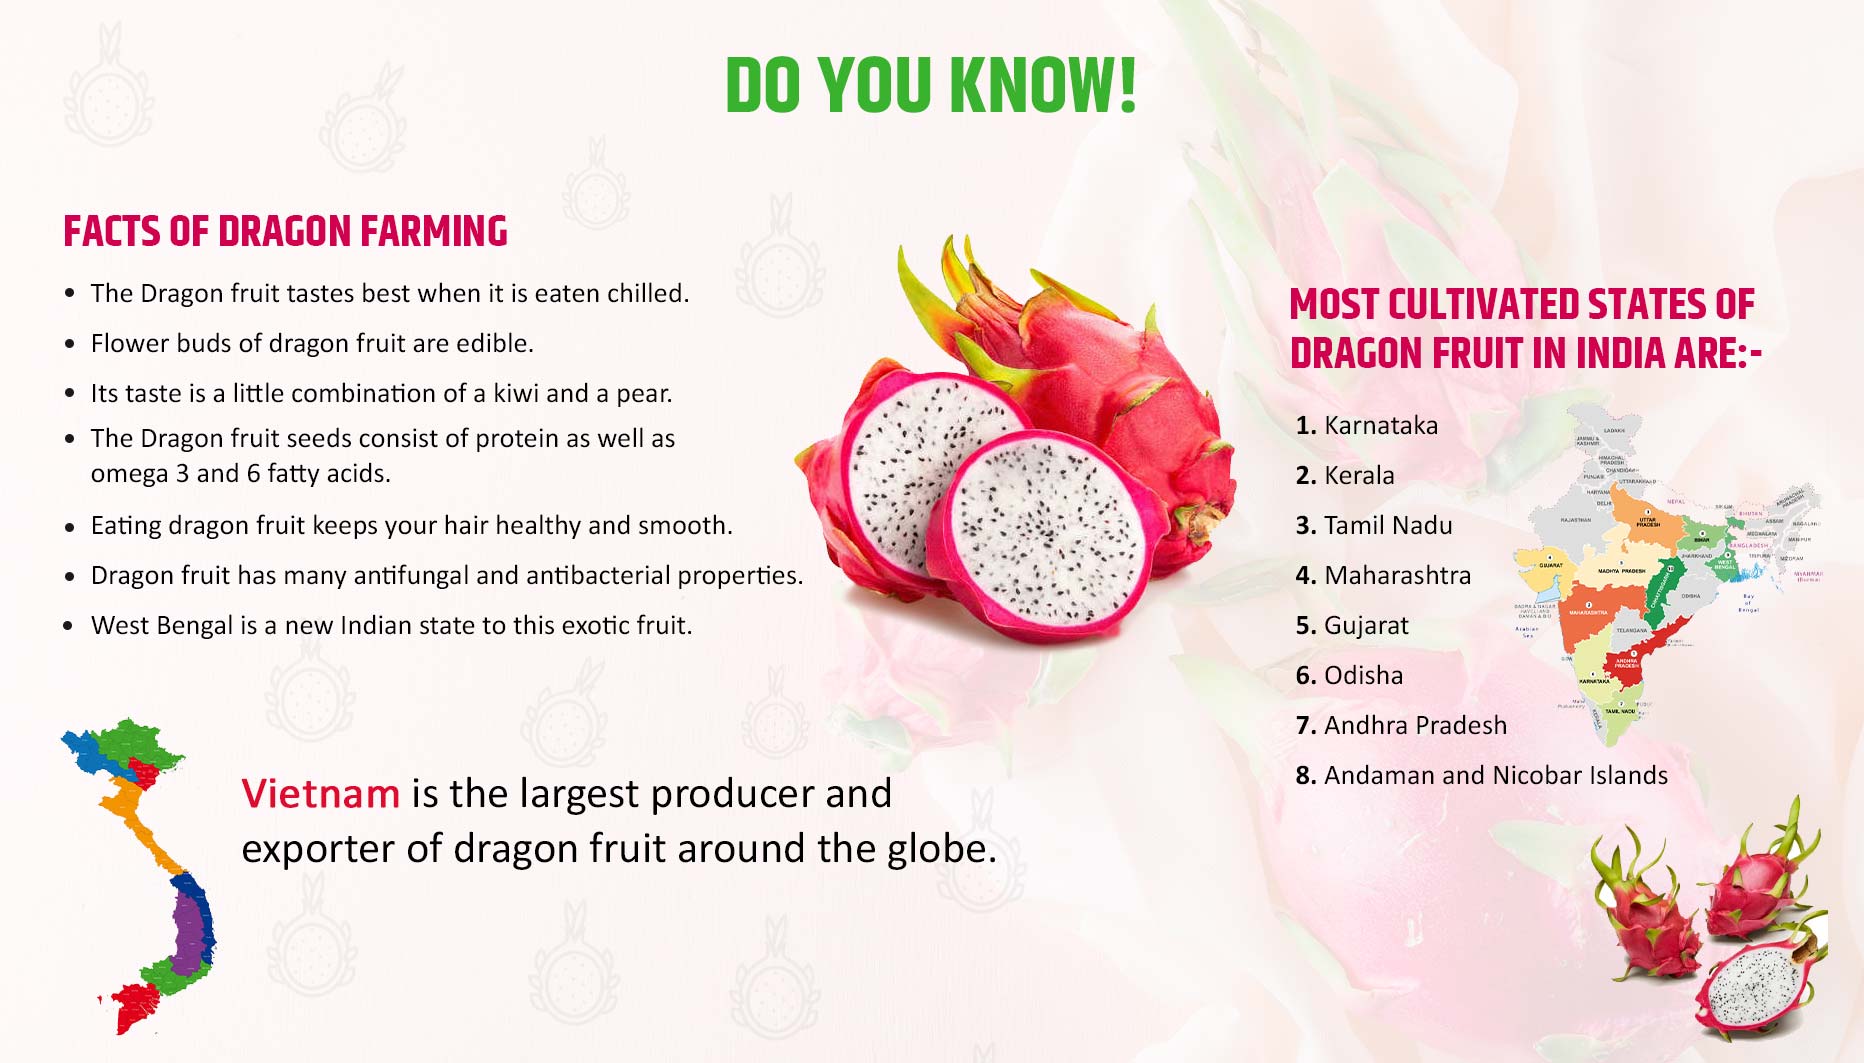 About Dragon Fruit